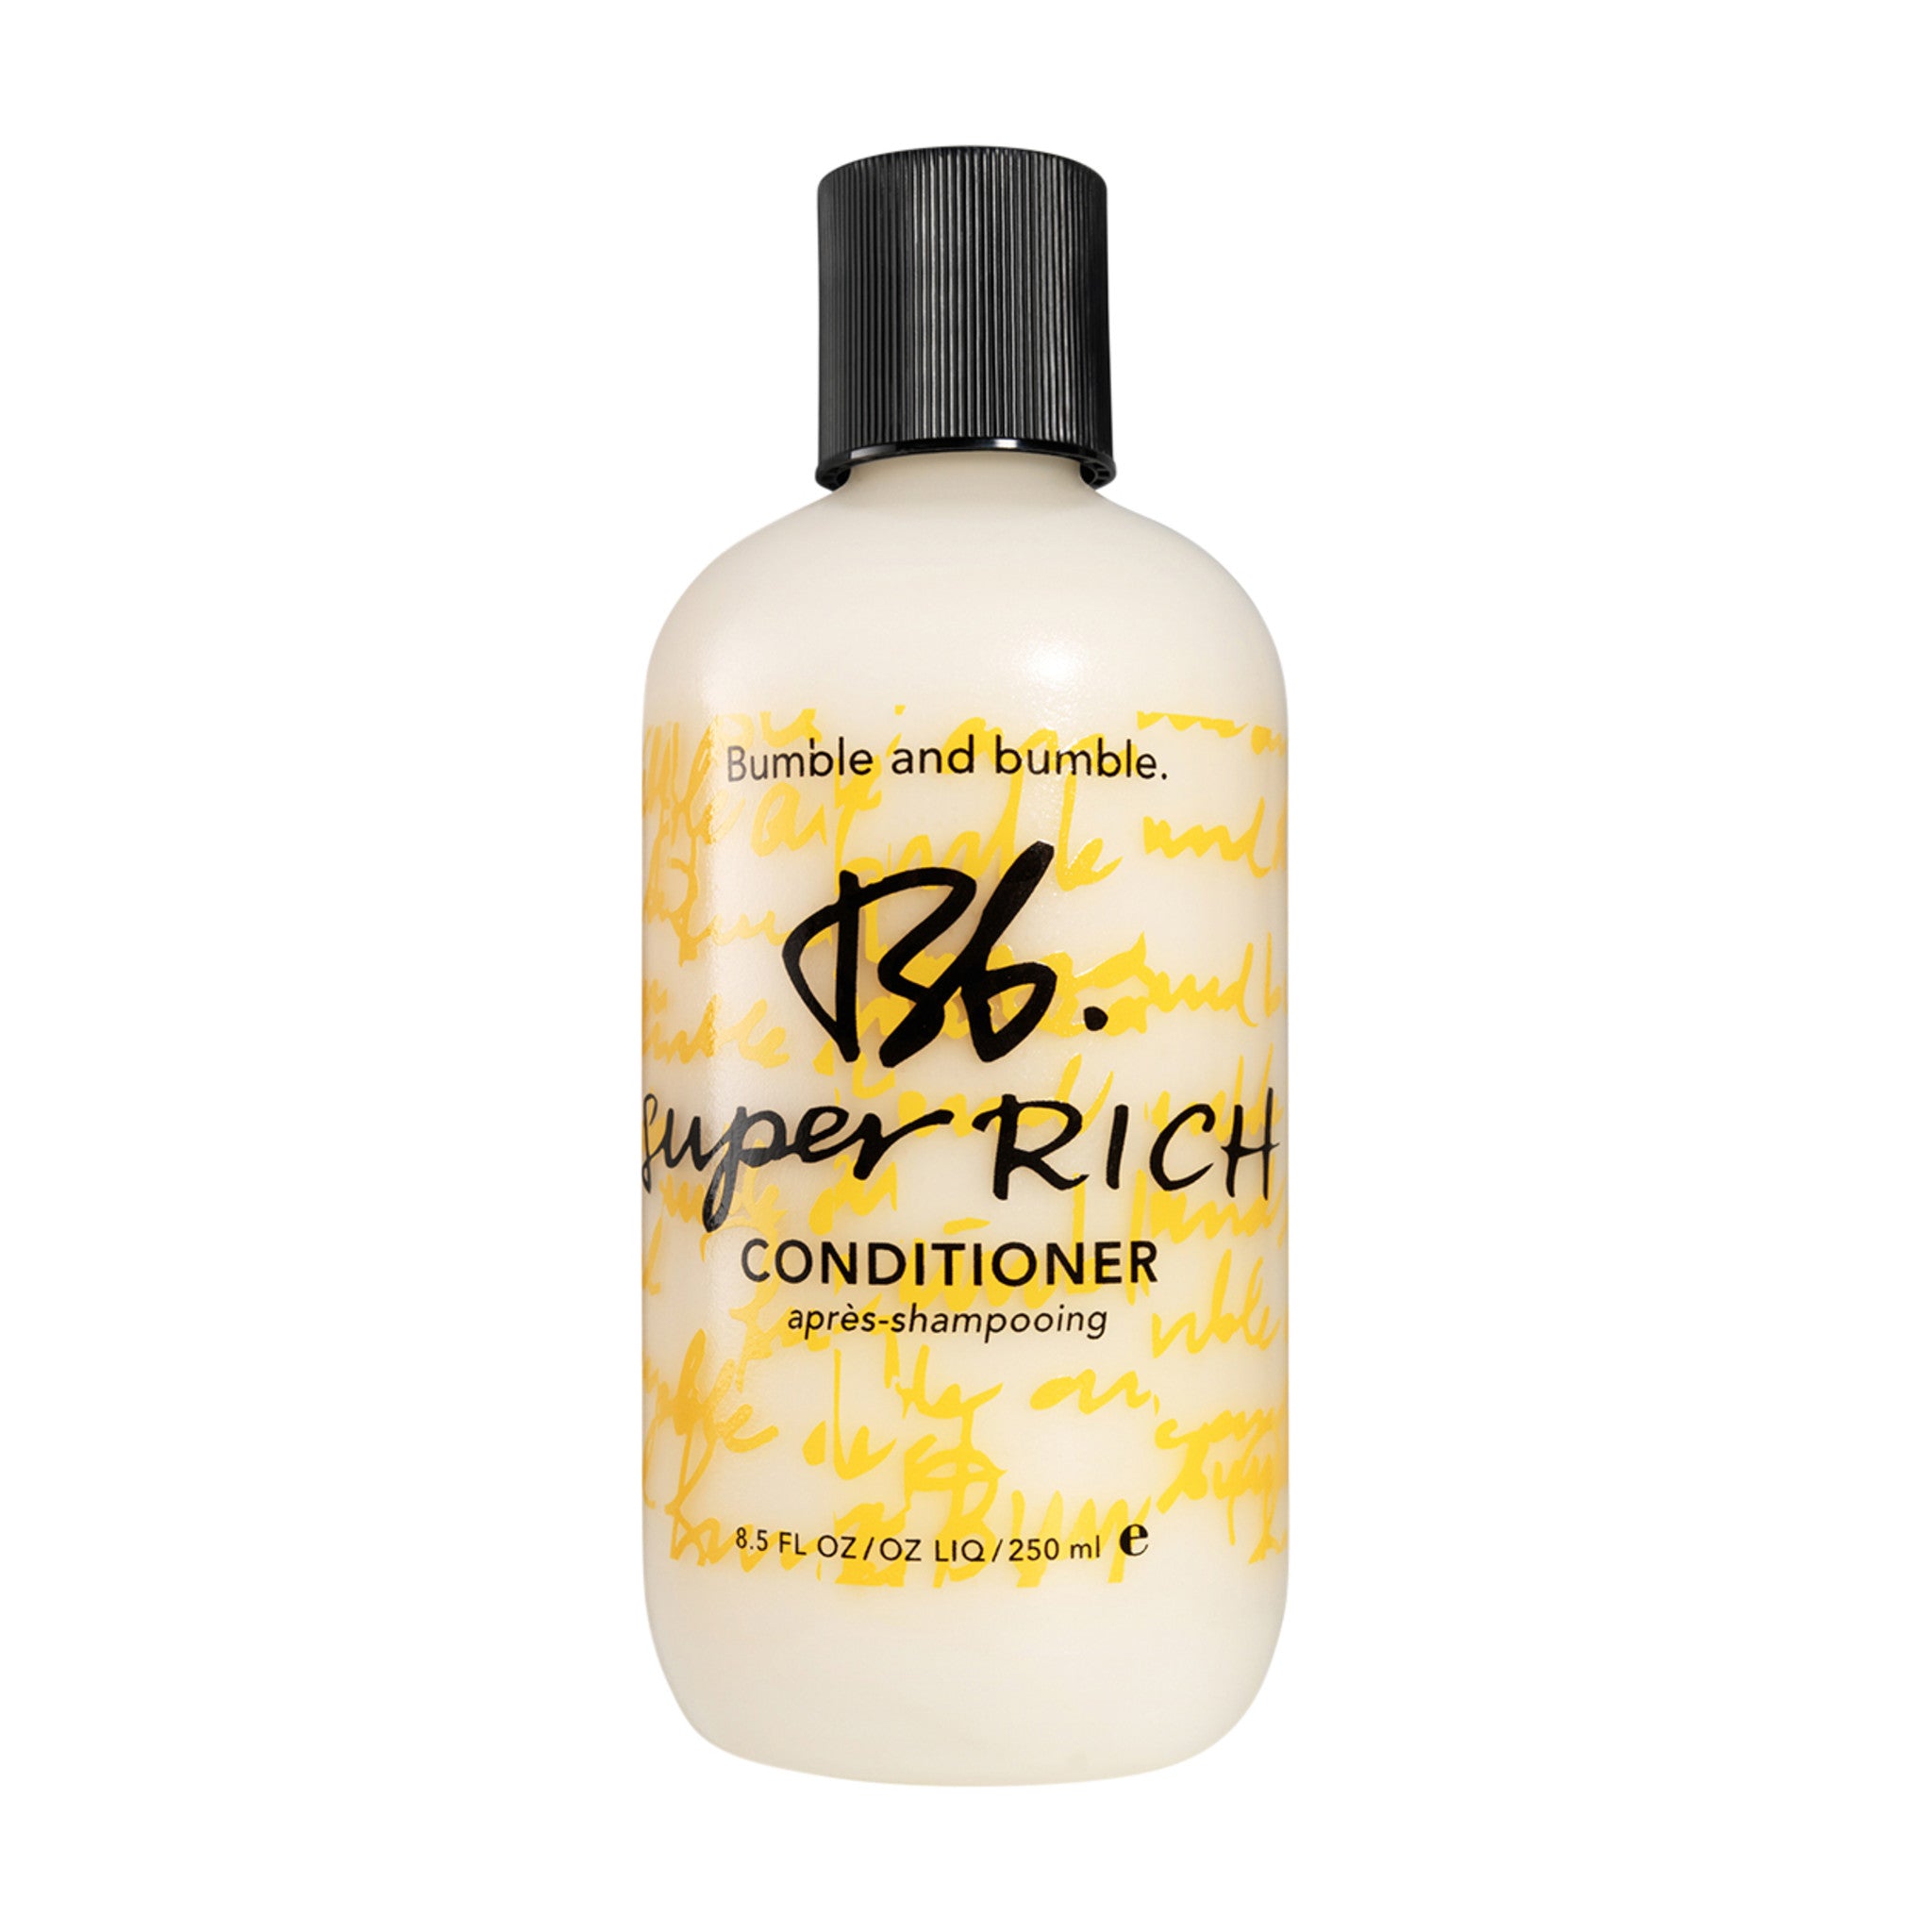 Bumble and Bumble Super Rich Conditioner Size variant: 8.5 Oz. main image.